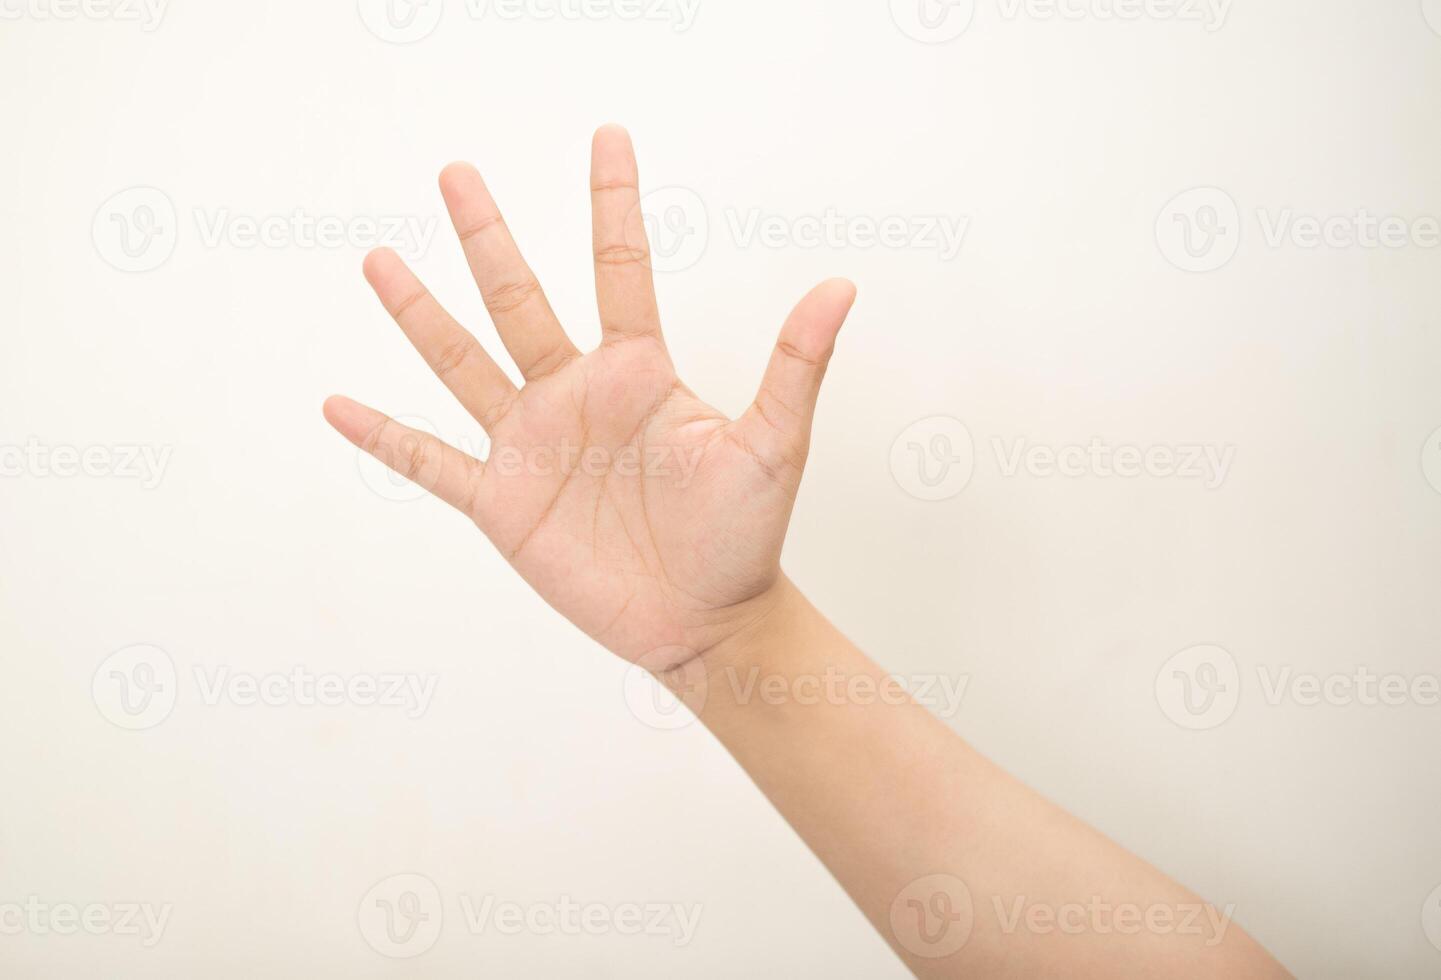 Hand pointing at something and make a sign on white background photo